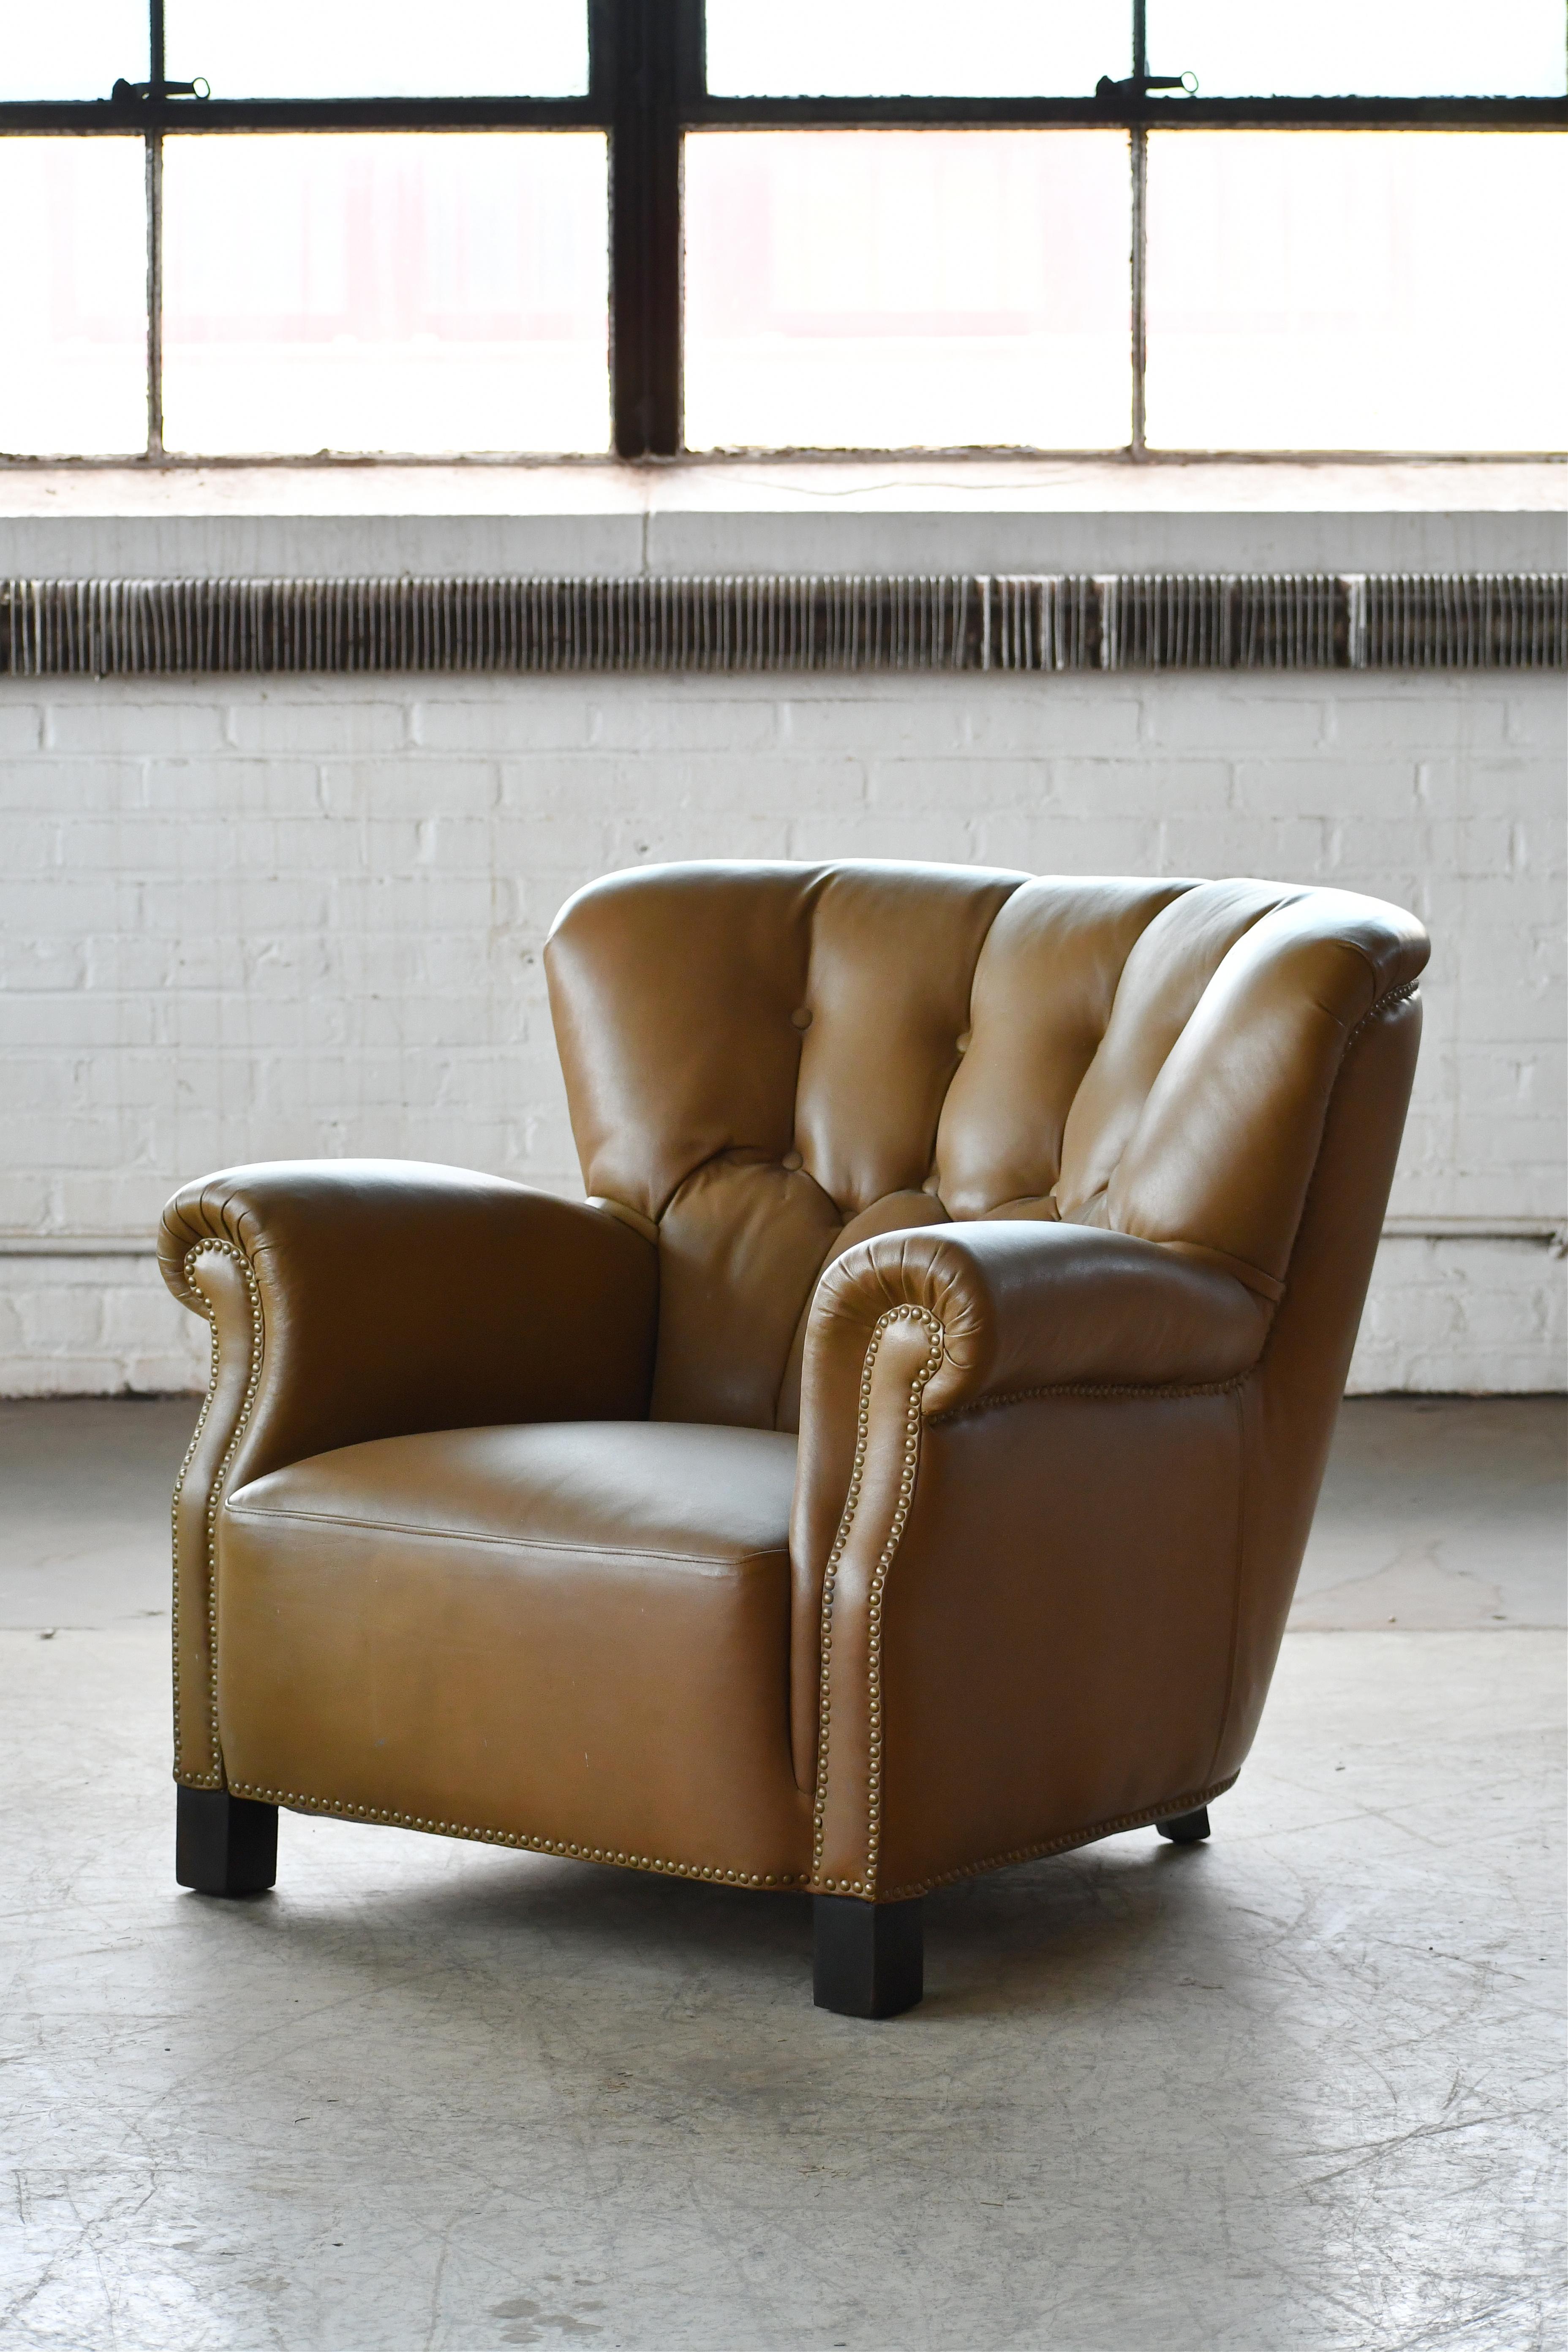 Classic Danish large-scale club or lounge chair model 1518b by Fritz Hansen made in the large 1930-early 1940s. The model 1518b has a lower backrest and higher armrests than the standard 1518 which provides for very cool lines. It is also a lot less